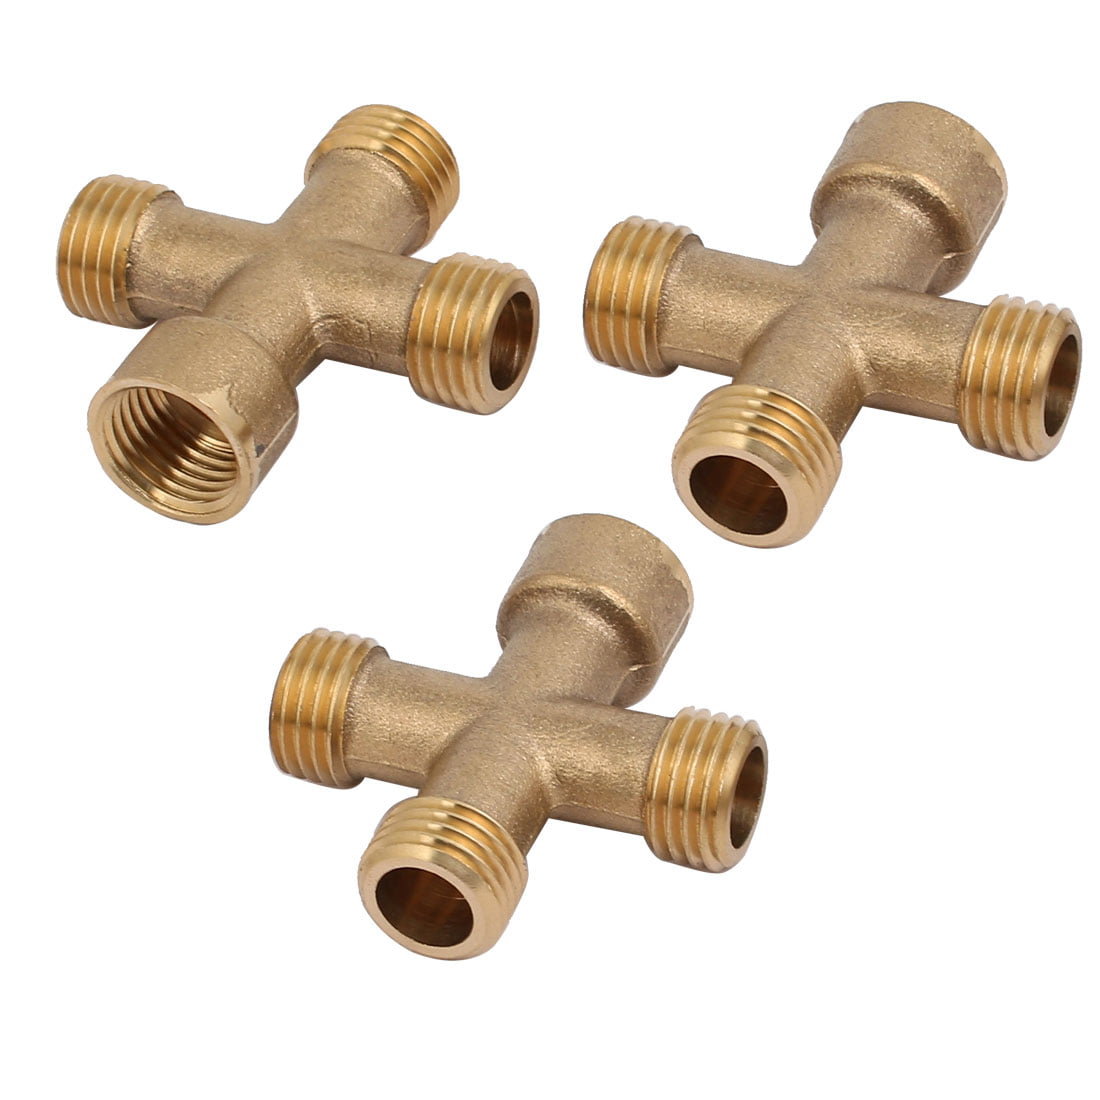 M13 Male Thread 1/4" Tube 3 Ways T Shaped Quick Connector 3pcs